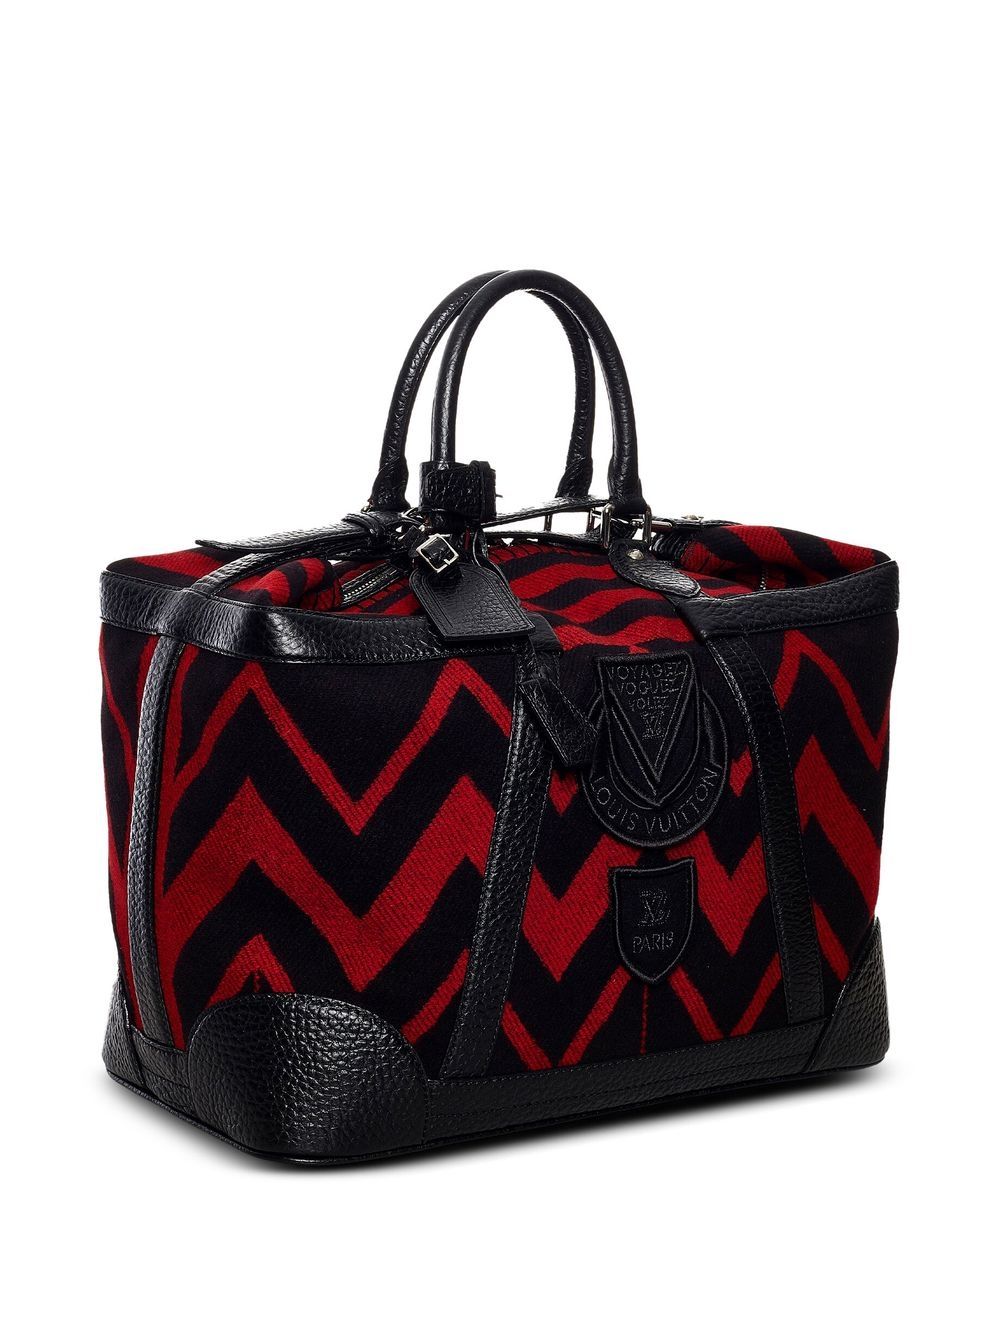 LOUIS VUITTON VAIL BLANKET GRIMAUD BAG- Autumn 2006 Collection- Carry On